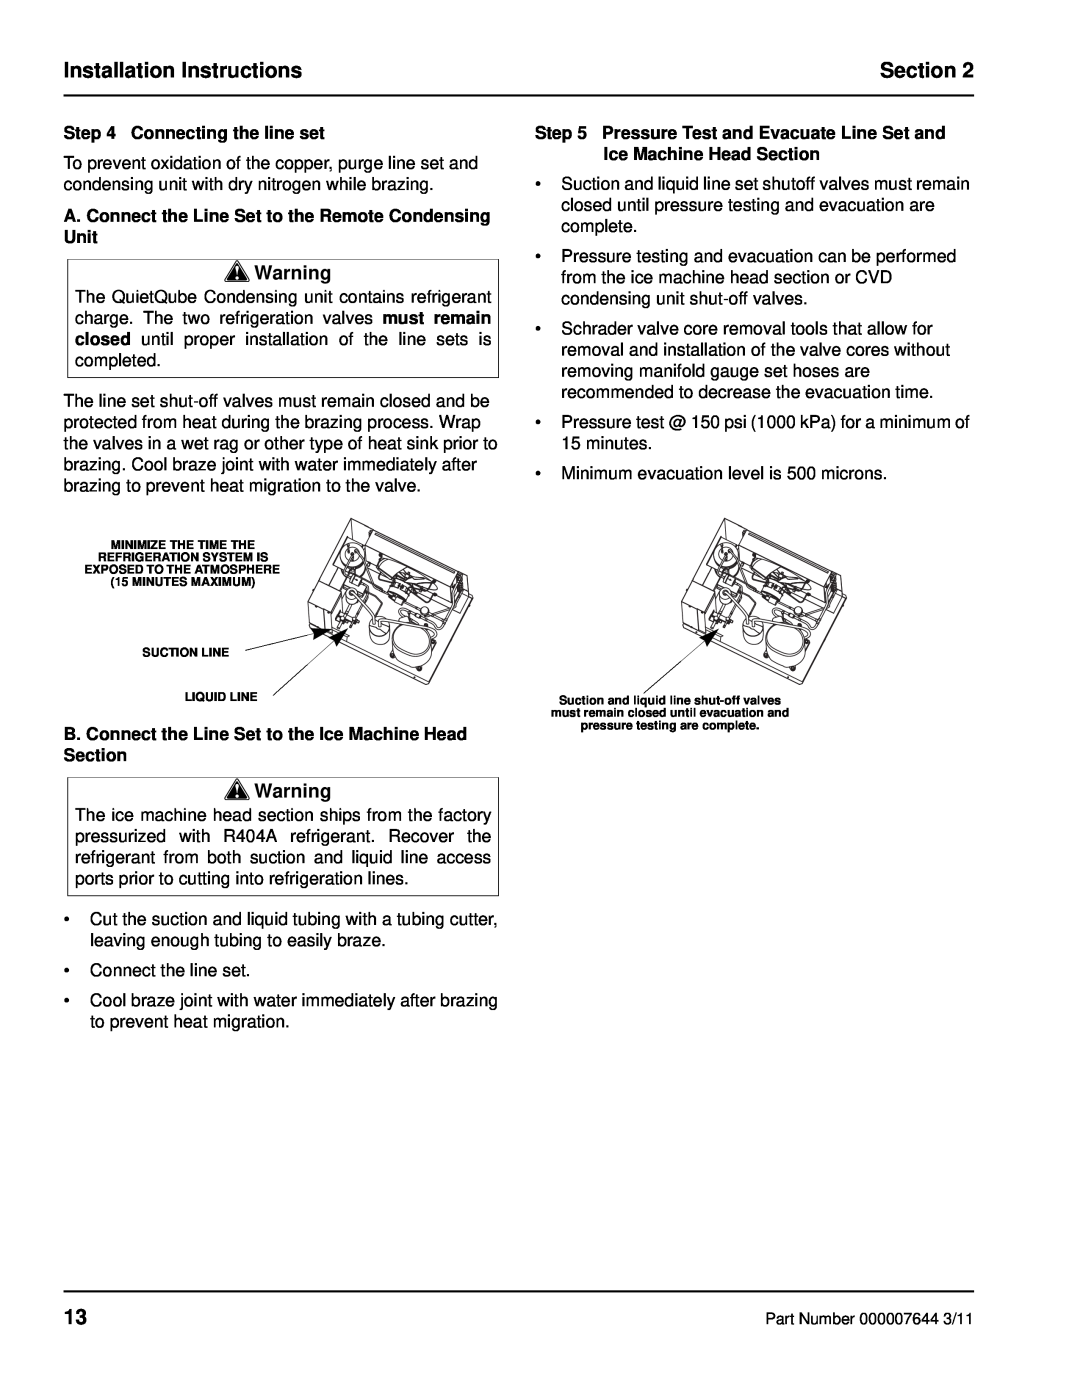 Manitowoc Ice RF manual Installation Instructions, Section 